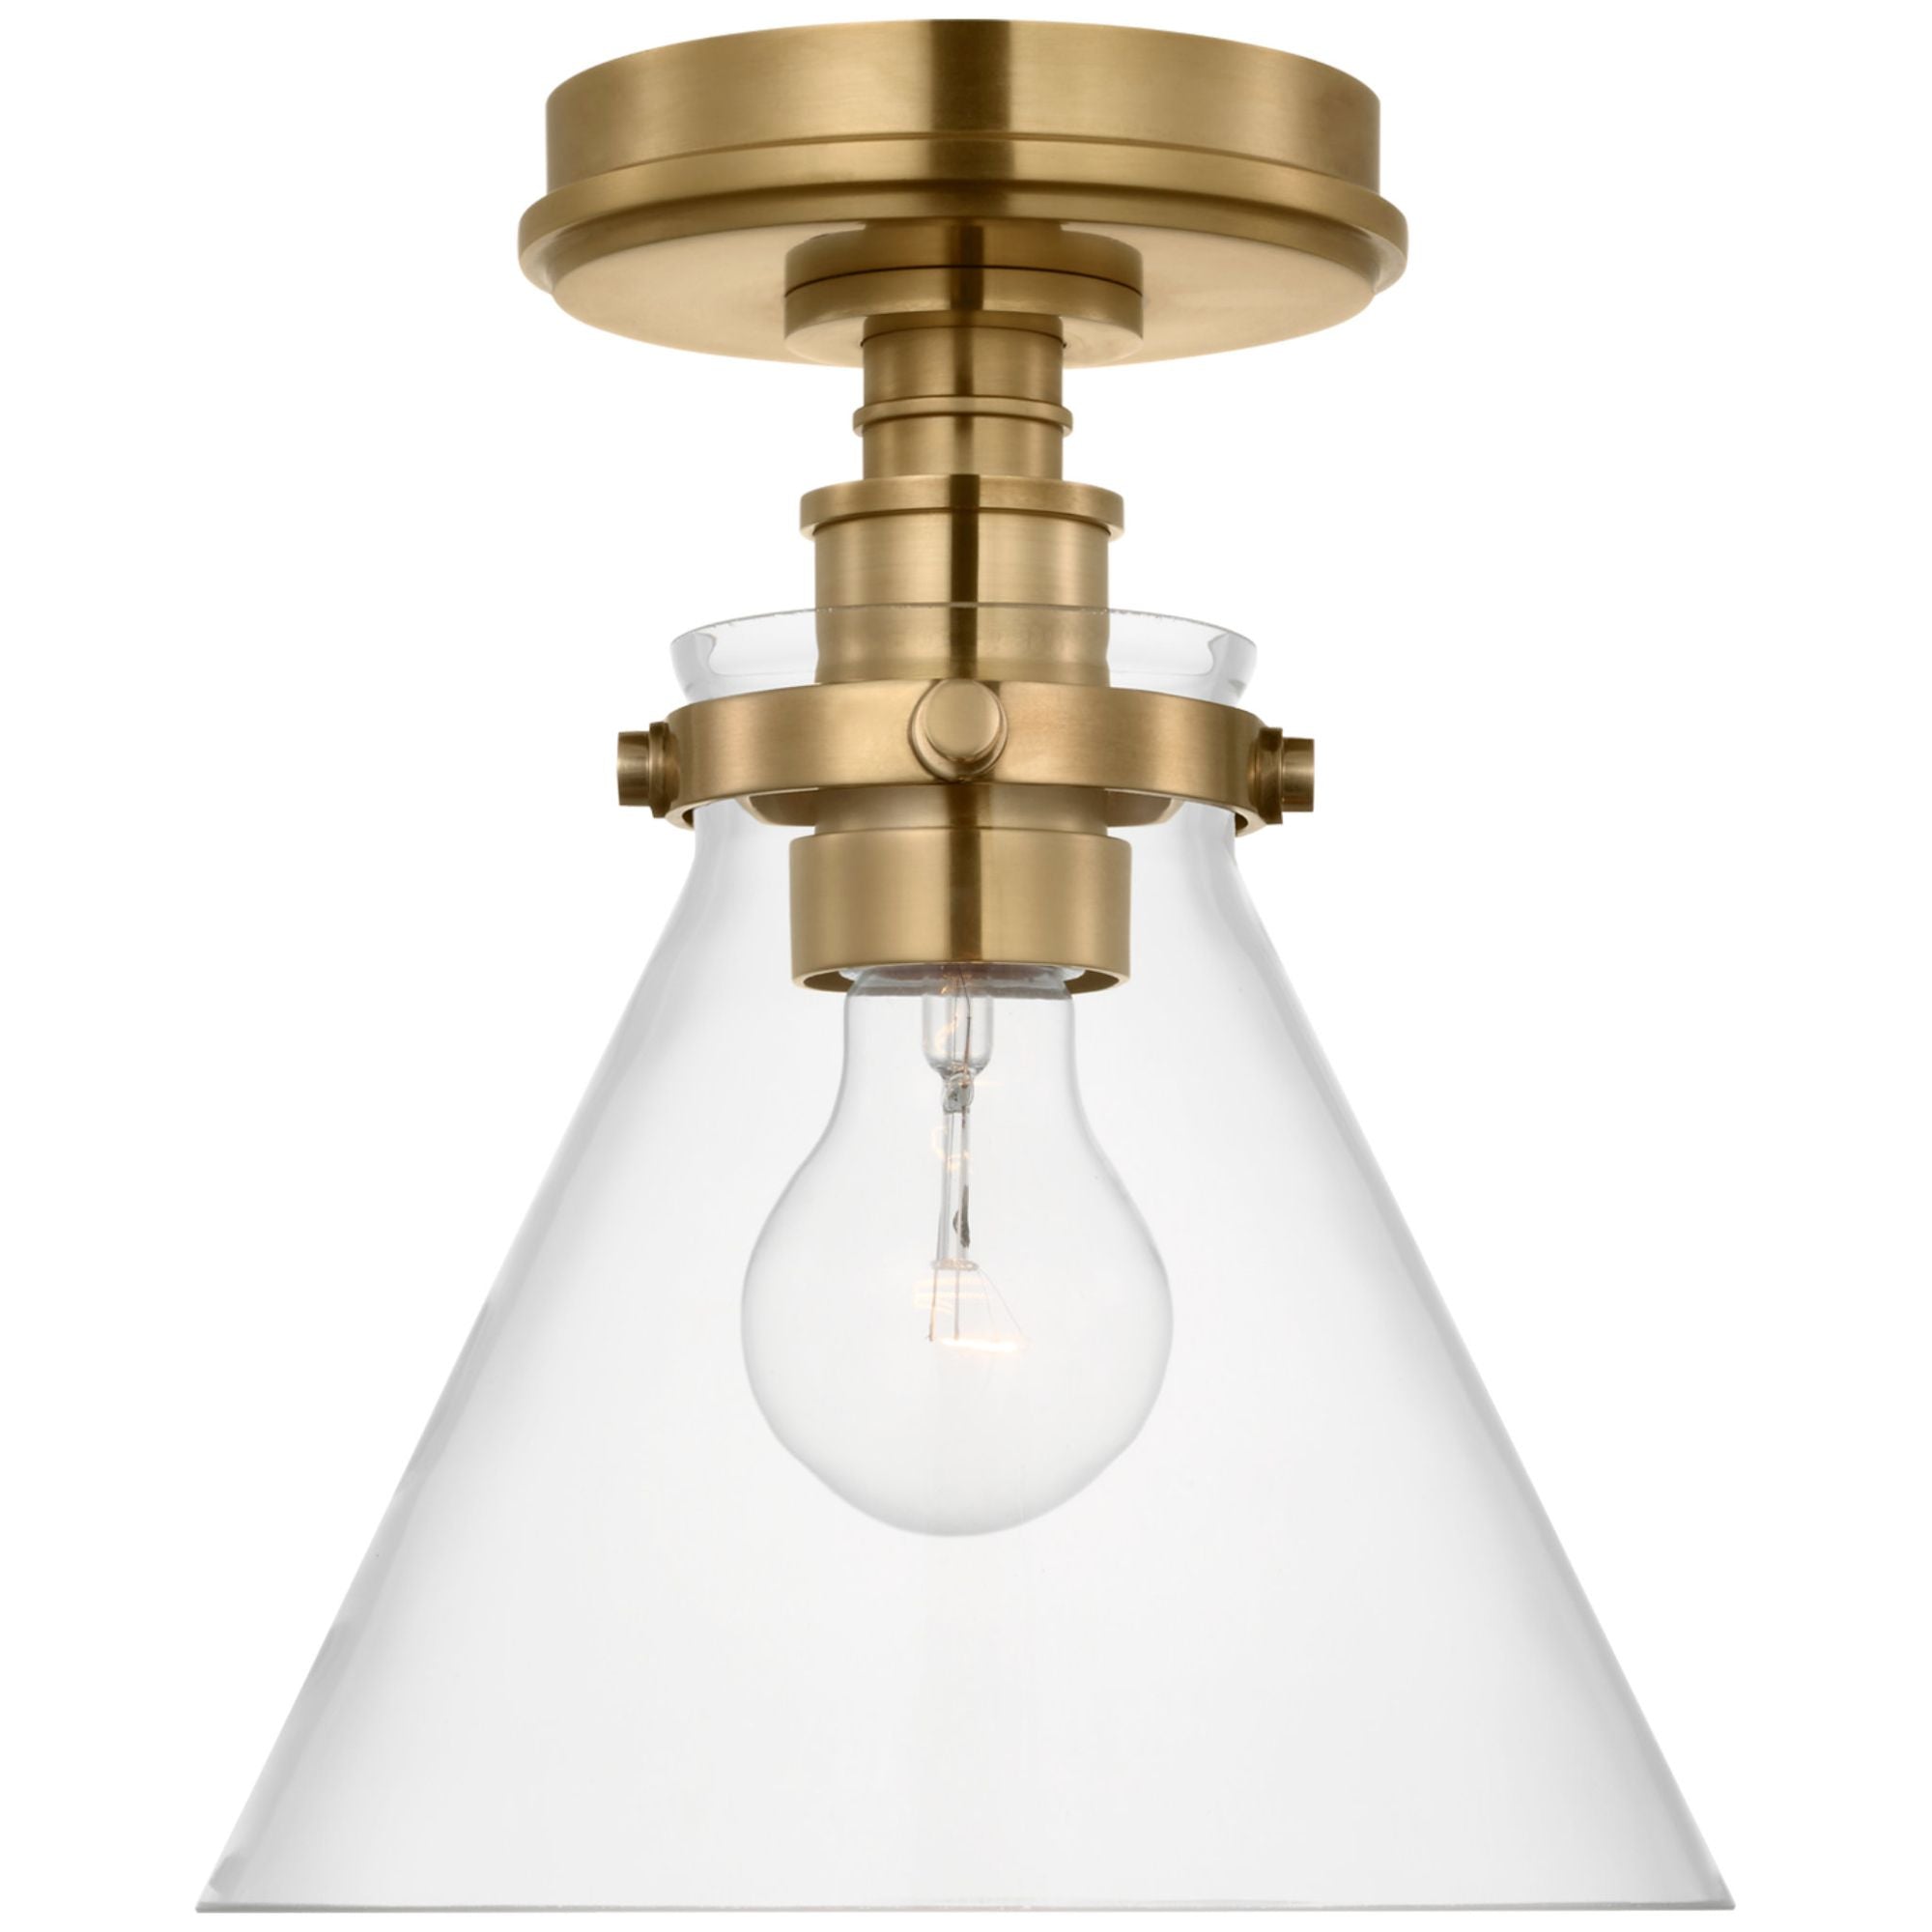 Chapman & Myers Parkington 9" Conical Flush Mount in Antique-Burnished Brass with Clear Glass Ceiling Light